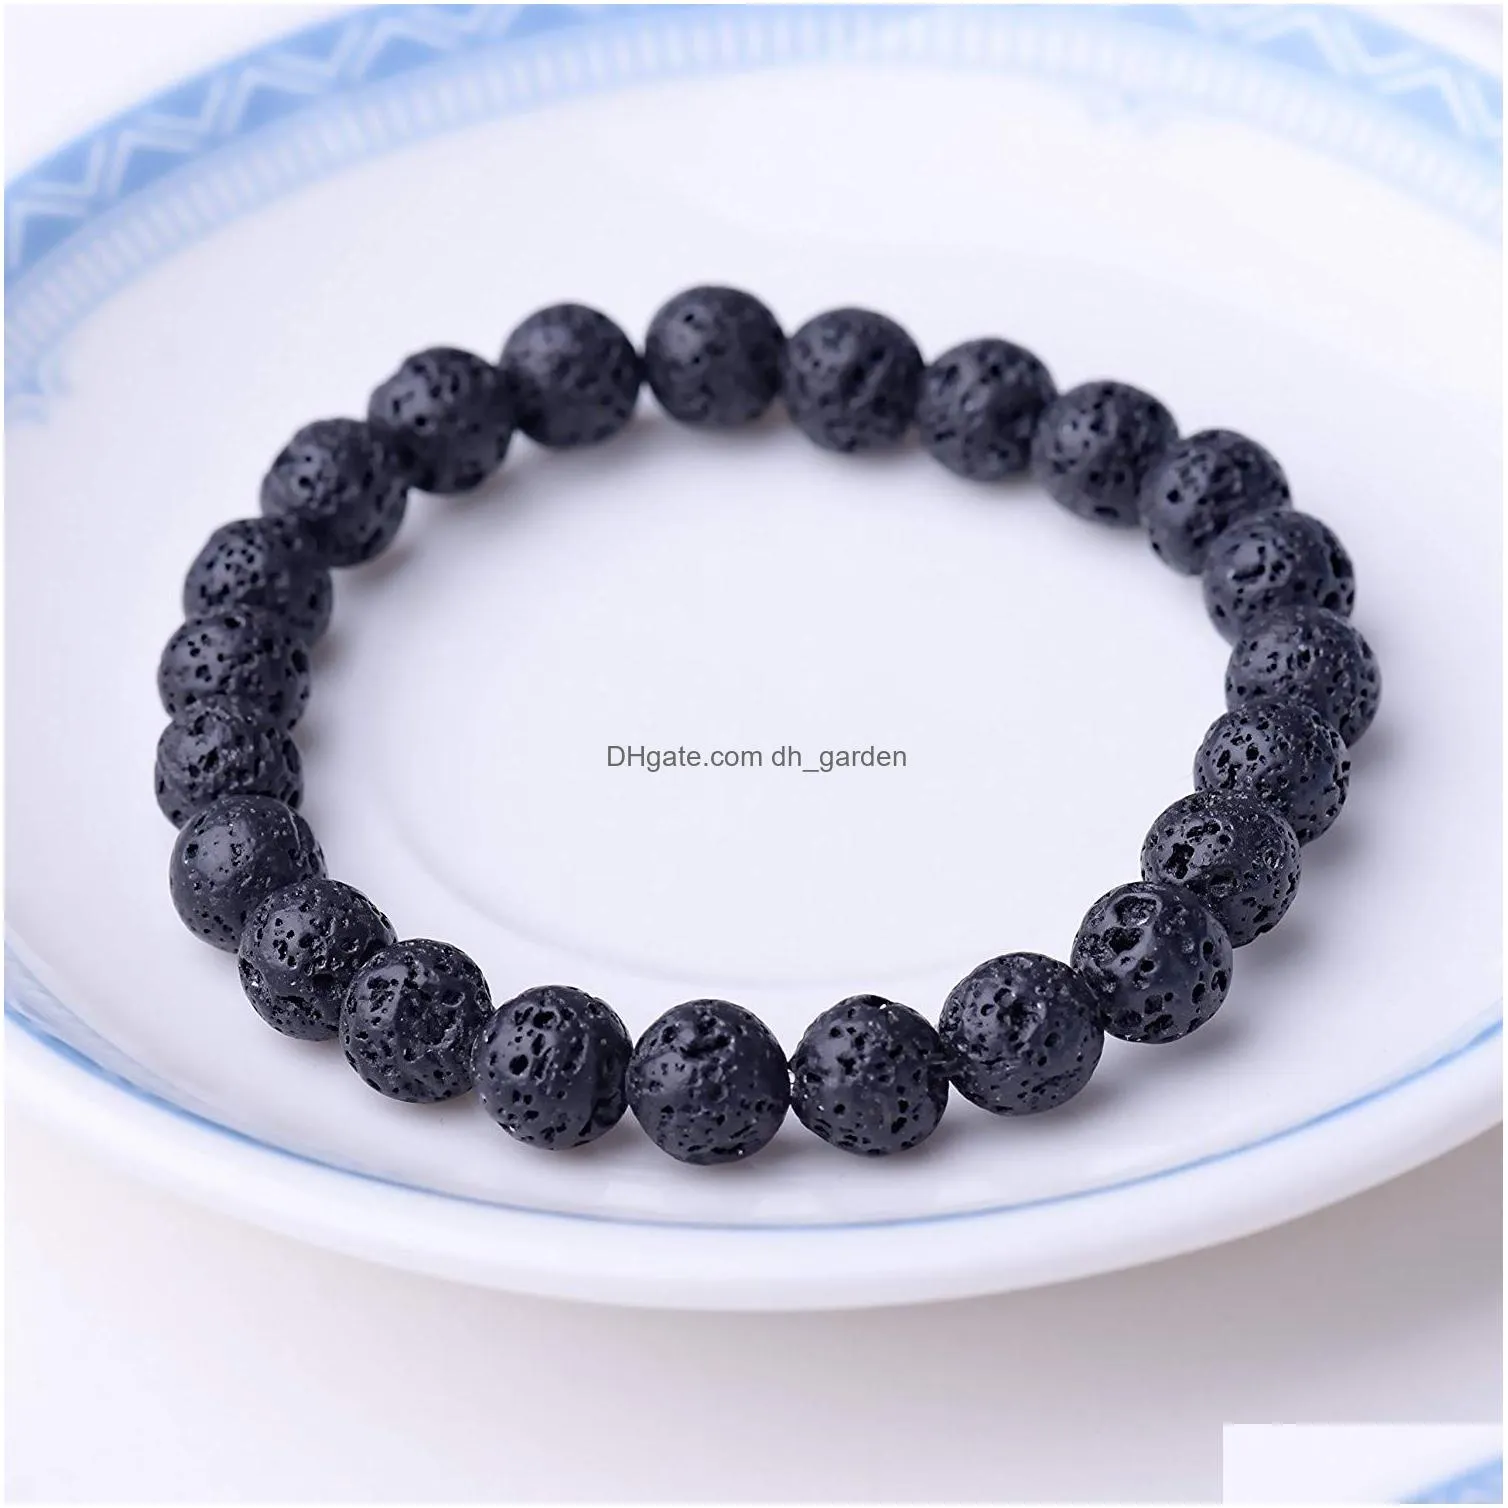 Beaded 8Mm Black Natural Lava Stone Bead Bracelet For Men Women Adjustable Oil Per Diffuser Healing Stretch Yoga Jewelry Dr Dhgarden Dhafy